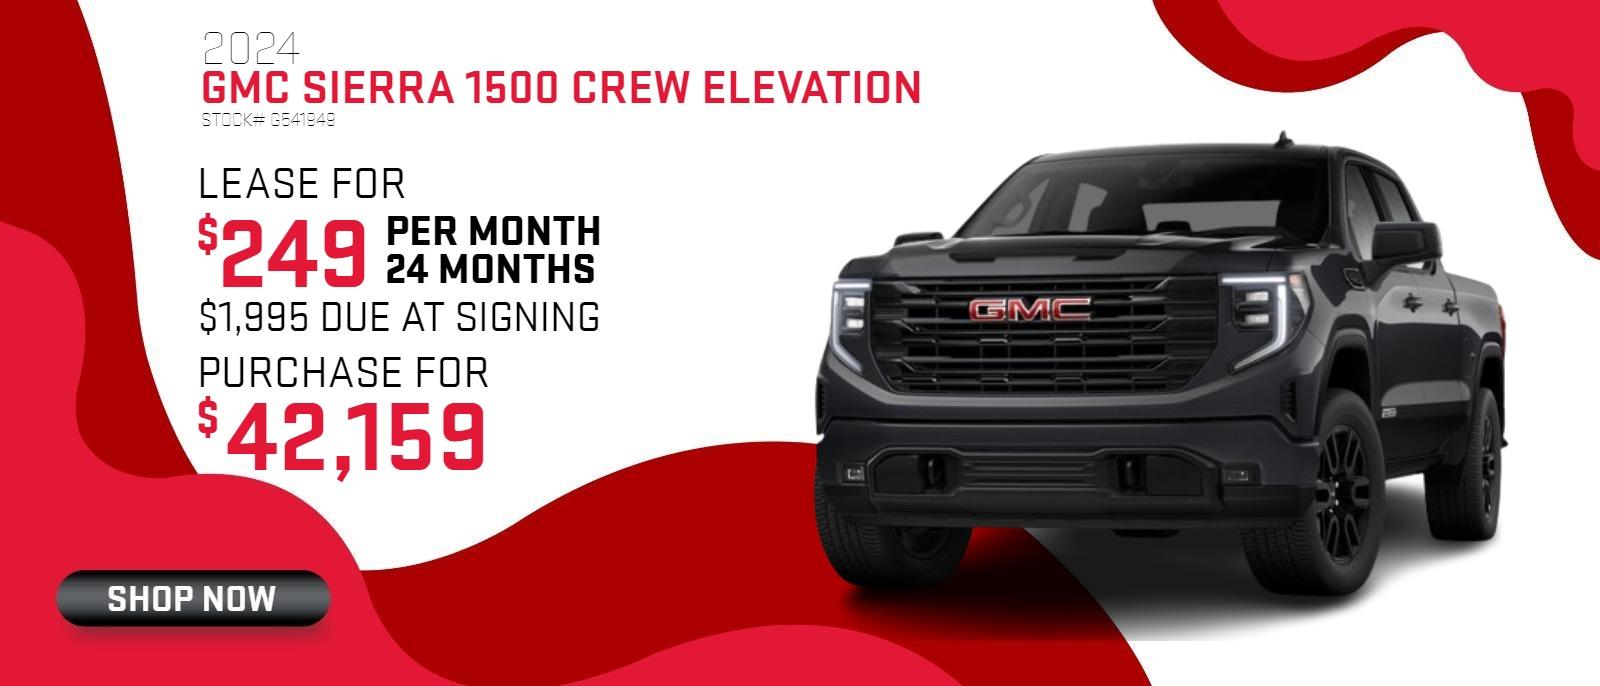 2024 Sierra 1500 Crew Elevation
Stock# G541949
Lease for $249 per month, 24 months, $1995 down
Purchase for $42,159